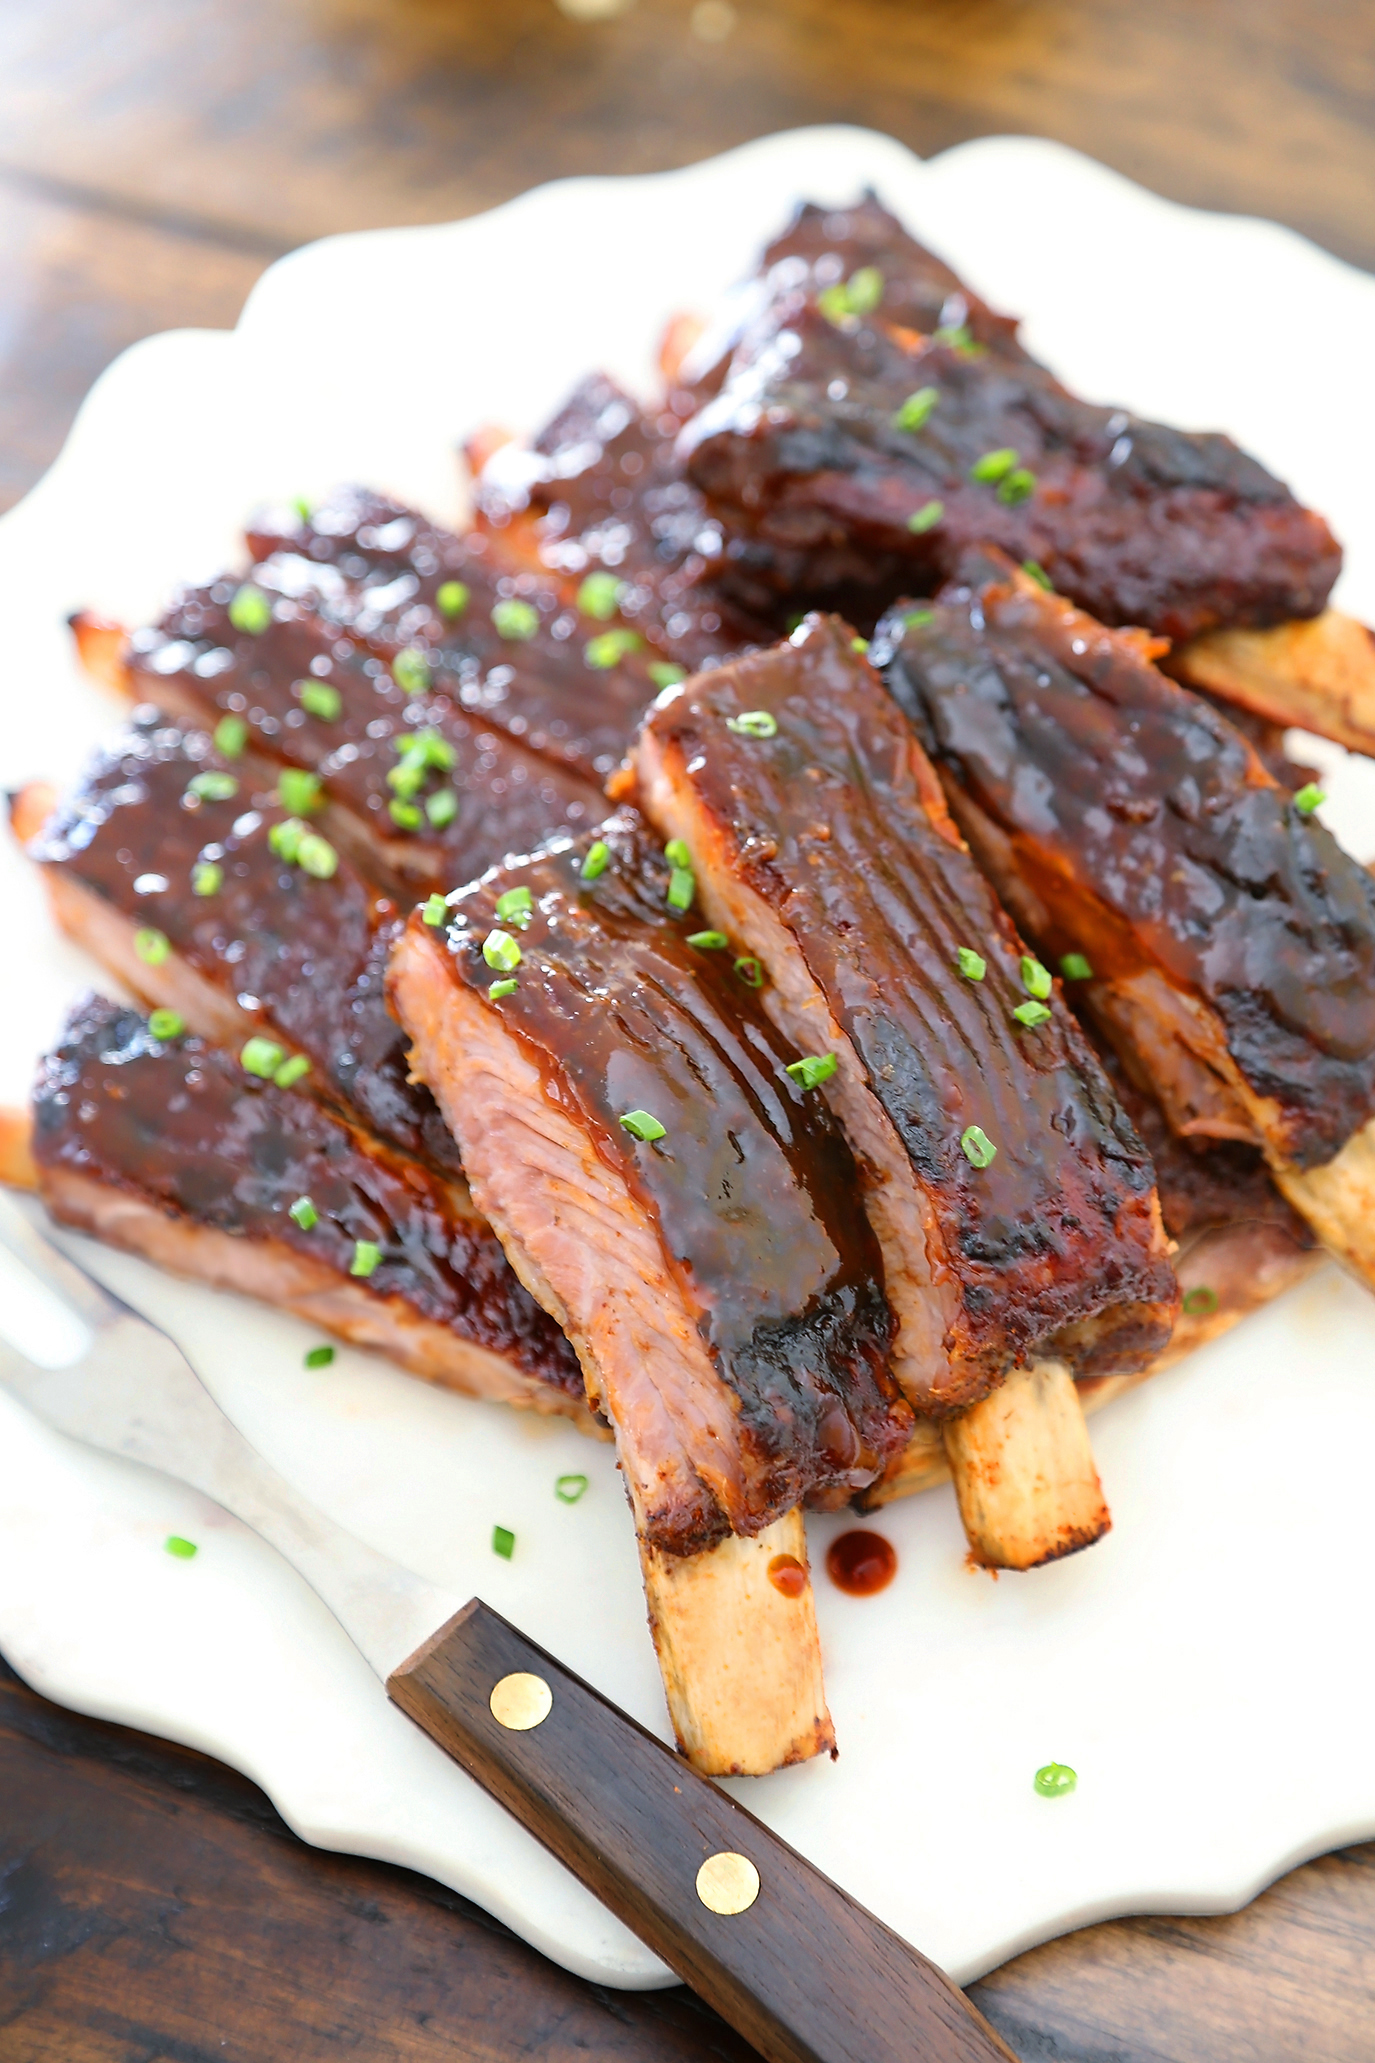 Sticky BBQ Spareribs - Melt-in-your-mouth, saucy BBQ spare ribs made in under 30 minutes! thecomfortofcooking.com